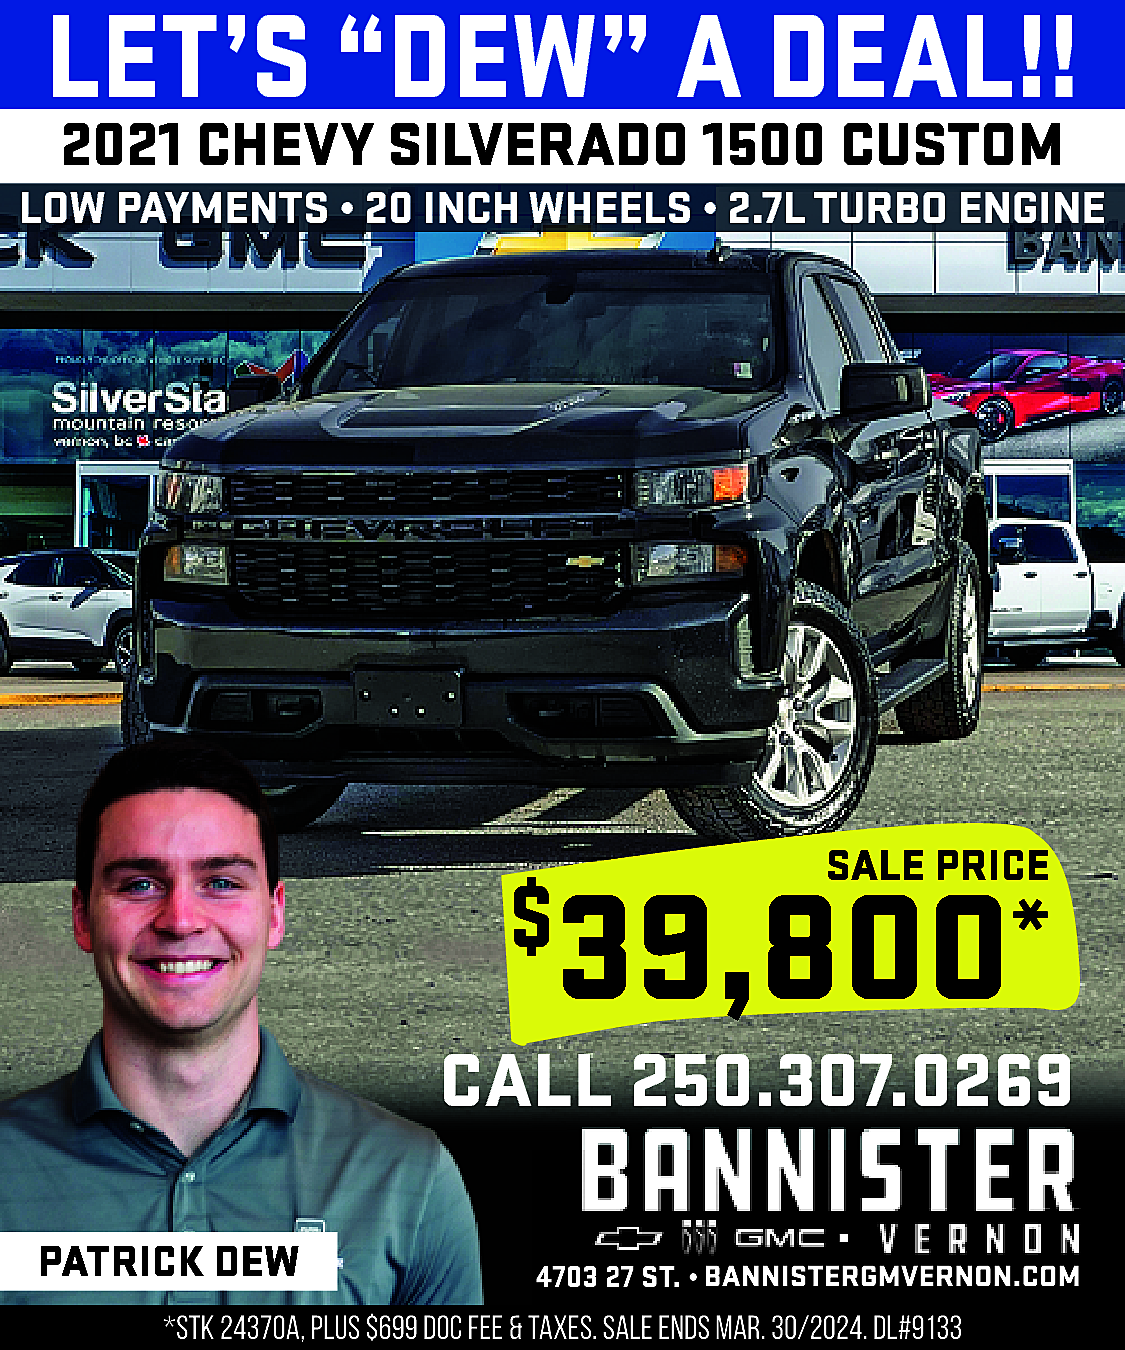 LET’S “DEW” A DEAL!! <br>2021  LET’S “DEW” A DEAL!!  2021 CHEVY SILVERADO 1500 CUSTOM    LOW PAYMENTS • 20 INCH WHEELS • 2.7L TURBO ENGINE    SALE PRICE    39,800*    $    CALL 250.307.0269  PATRICK DEW    4703 27 ST. • https://www.bannistergmvernon.com/    *STK 24370A, PLUS $699 DOC FEE & TAXES. SALE ENDS MAR. 30/2024. DL#9133    